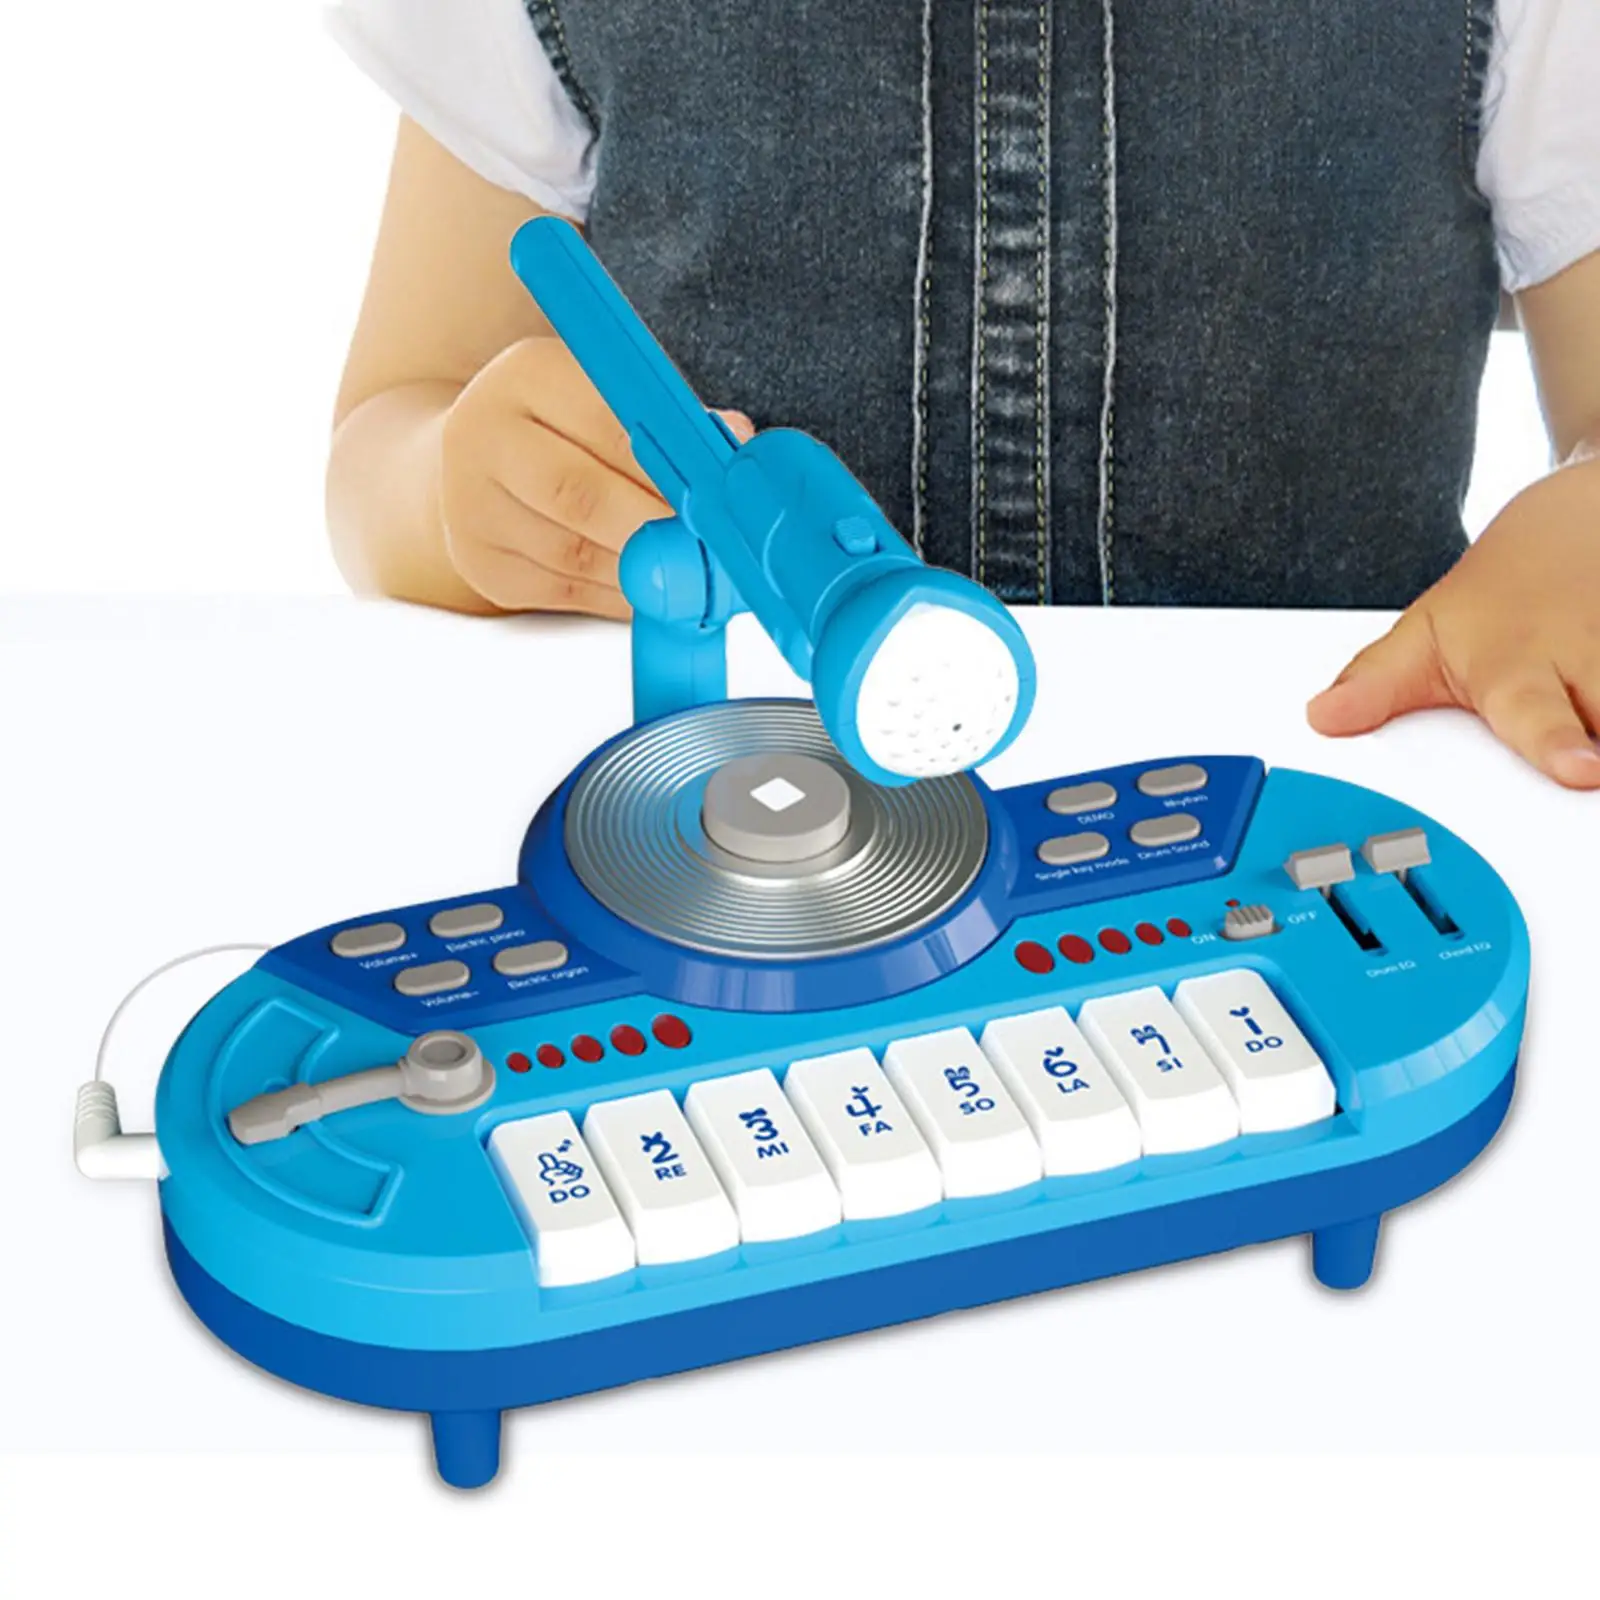 Musical Toys Rhythm Educational 8 Keys Keyboard Piano with Microphone Turntable DJ Party Mixer Turntable Toy for Toddler Girls